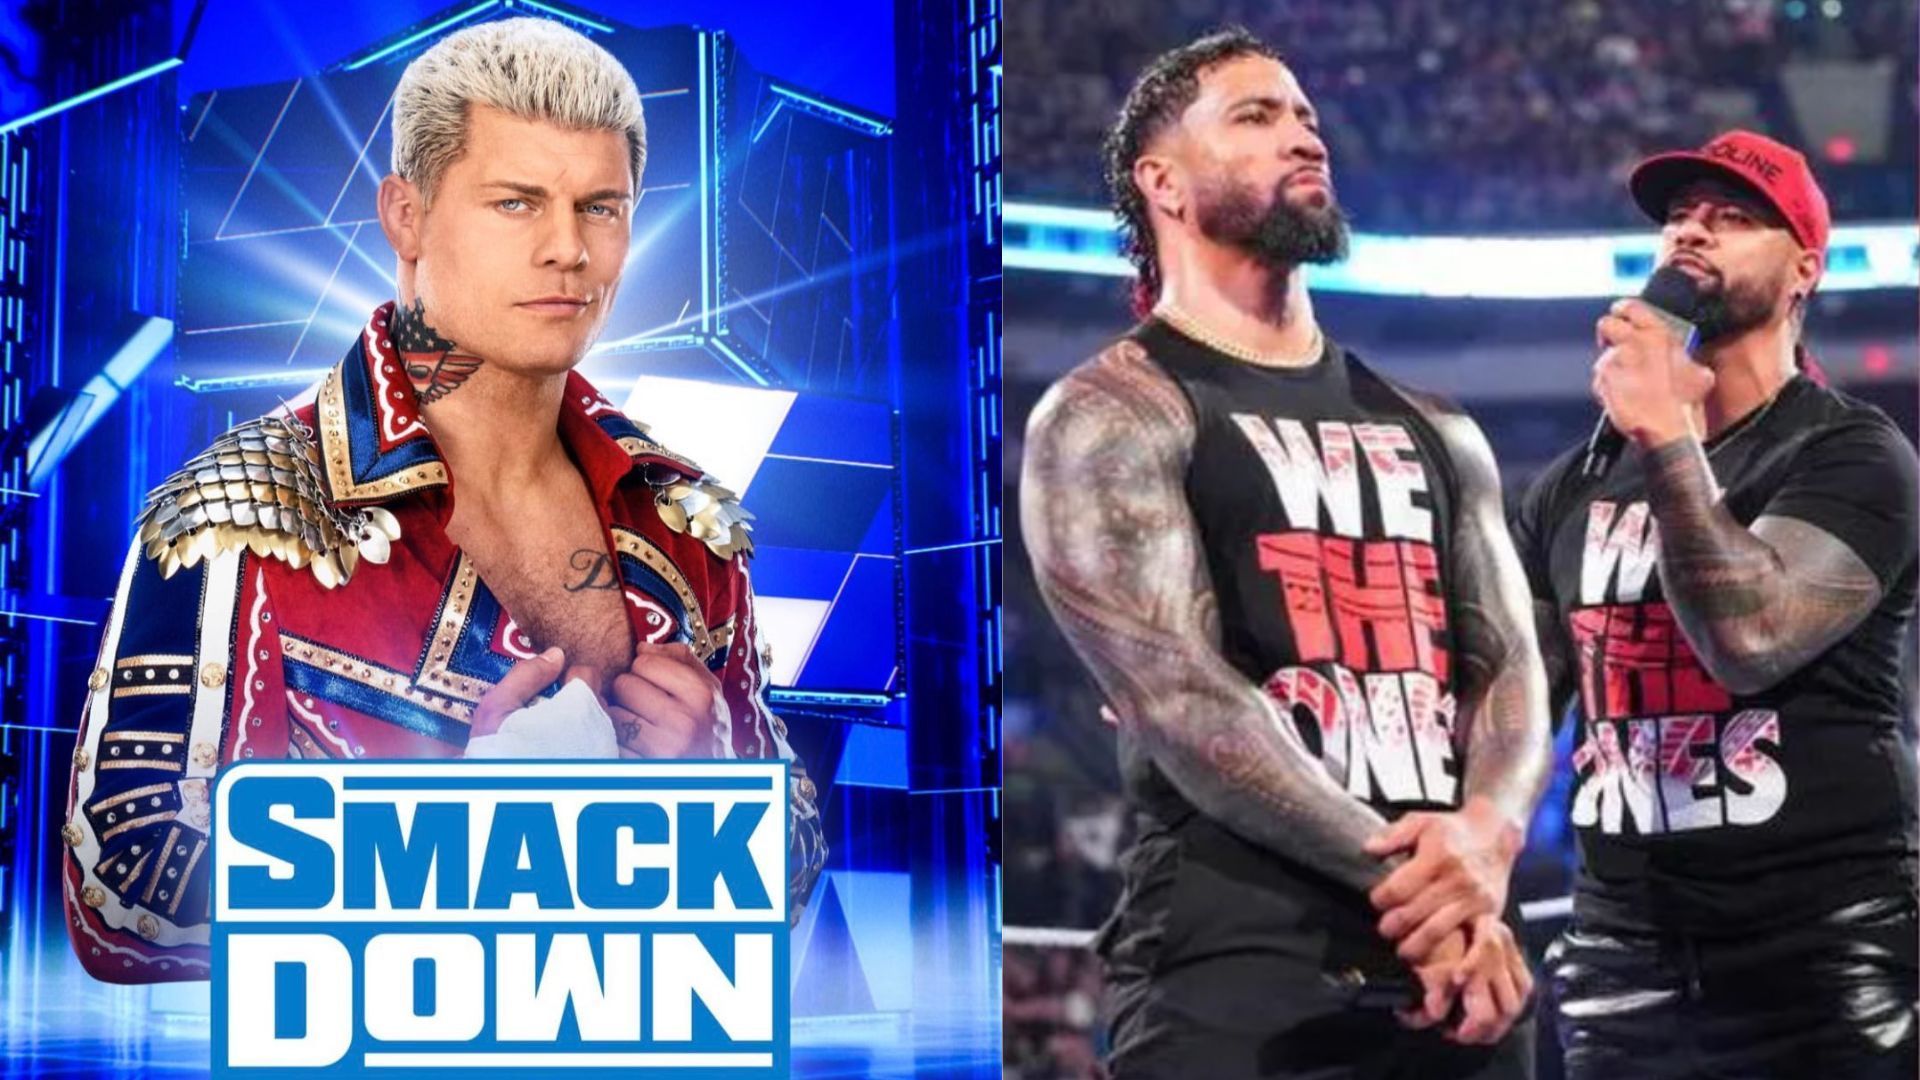 WWE SmackDown will feature The OC in action after several months